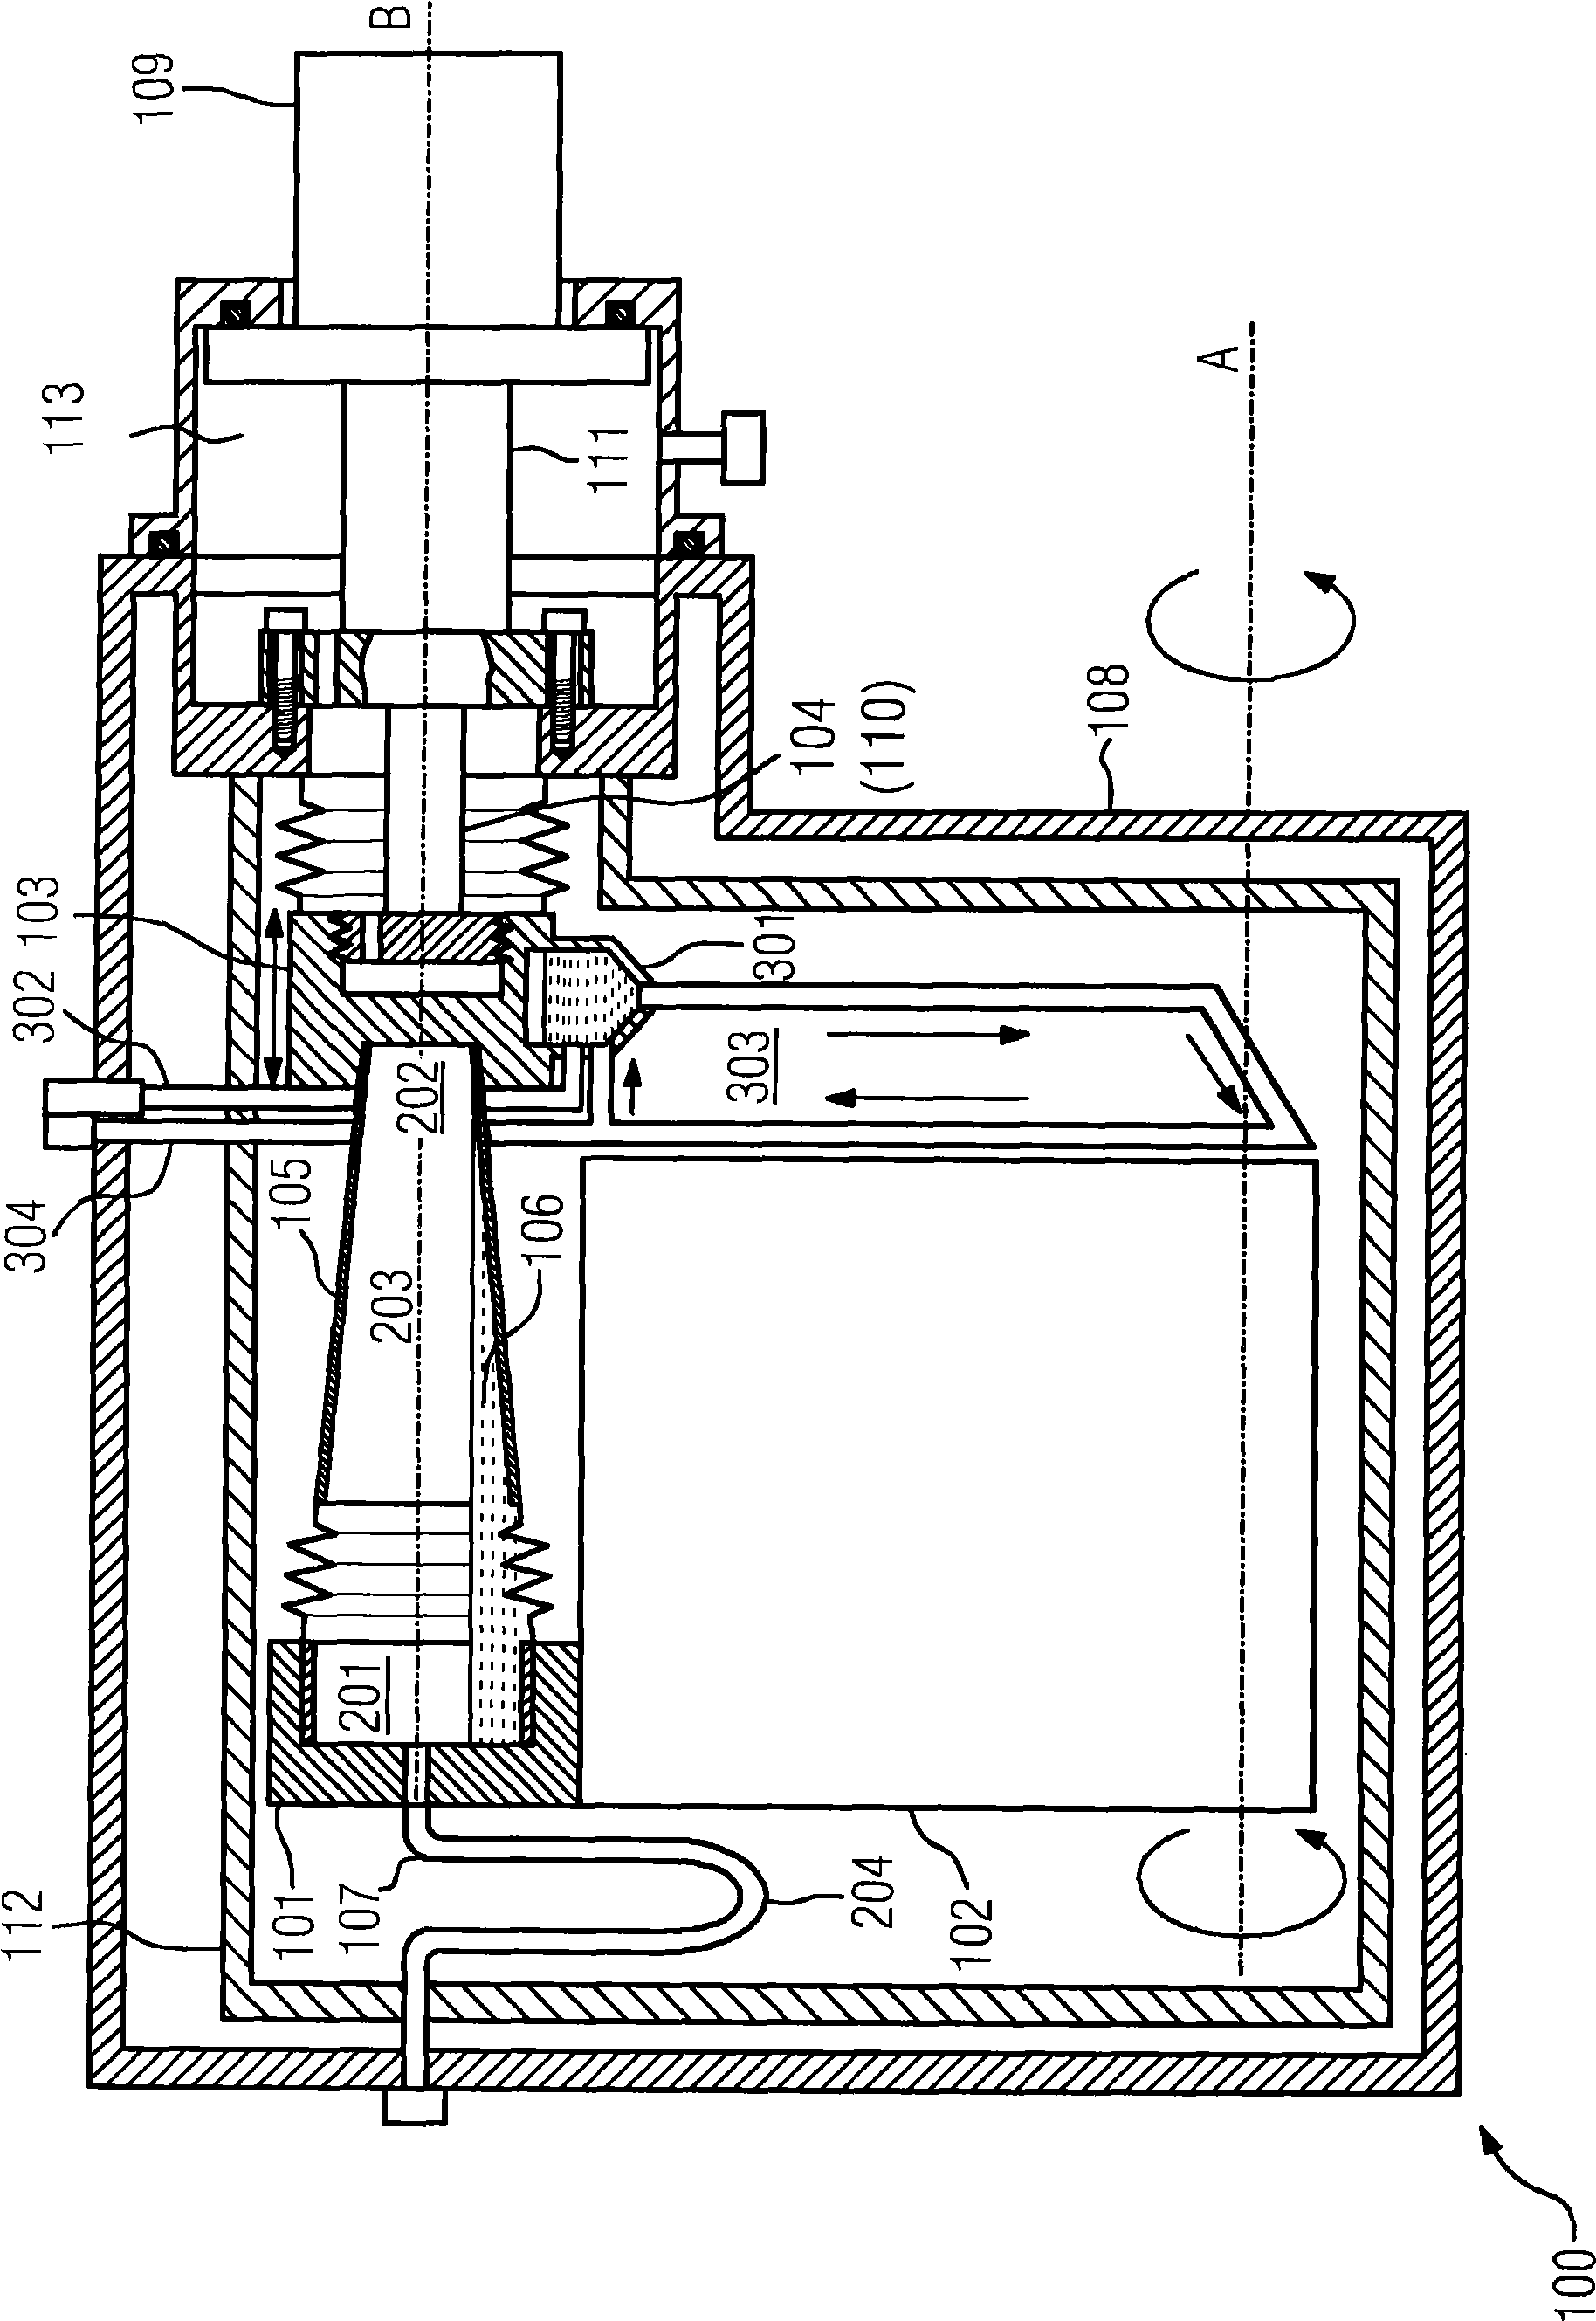 Refrigerating arrangement comprising a hot connection element and a cold connection element and a heat exchanger tube connected to the connection elements